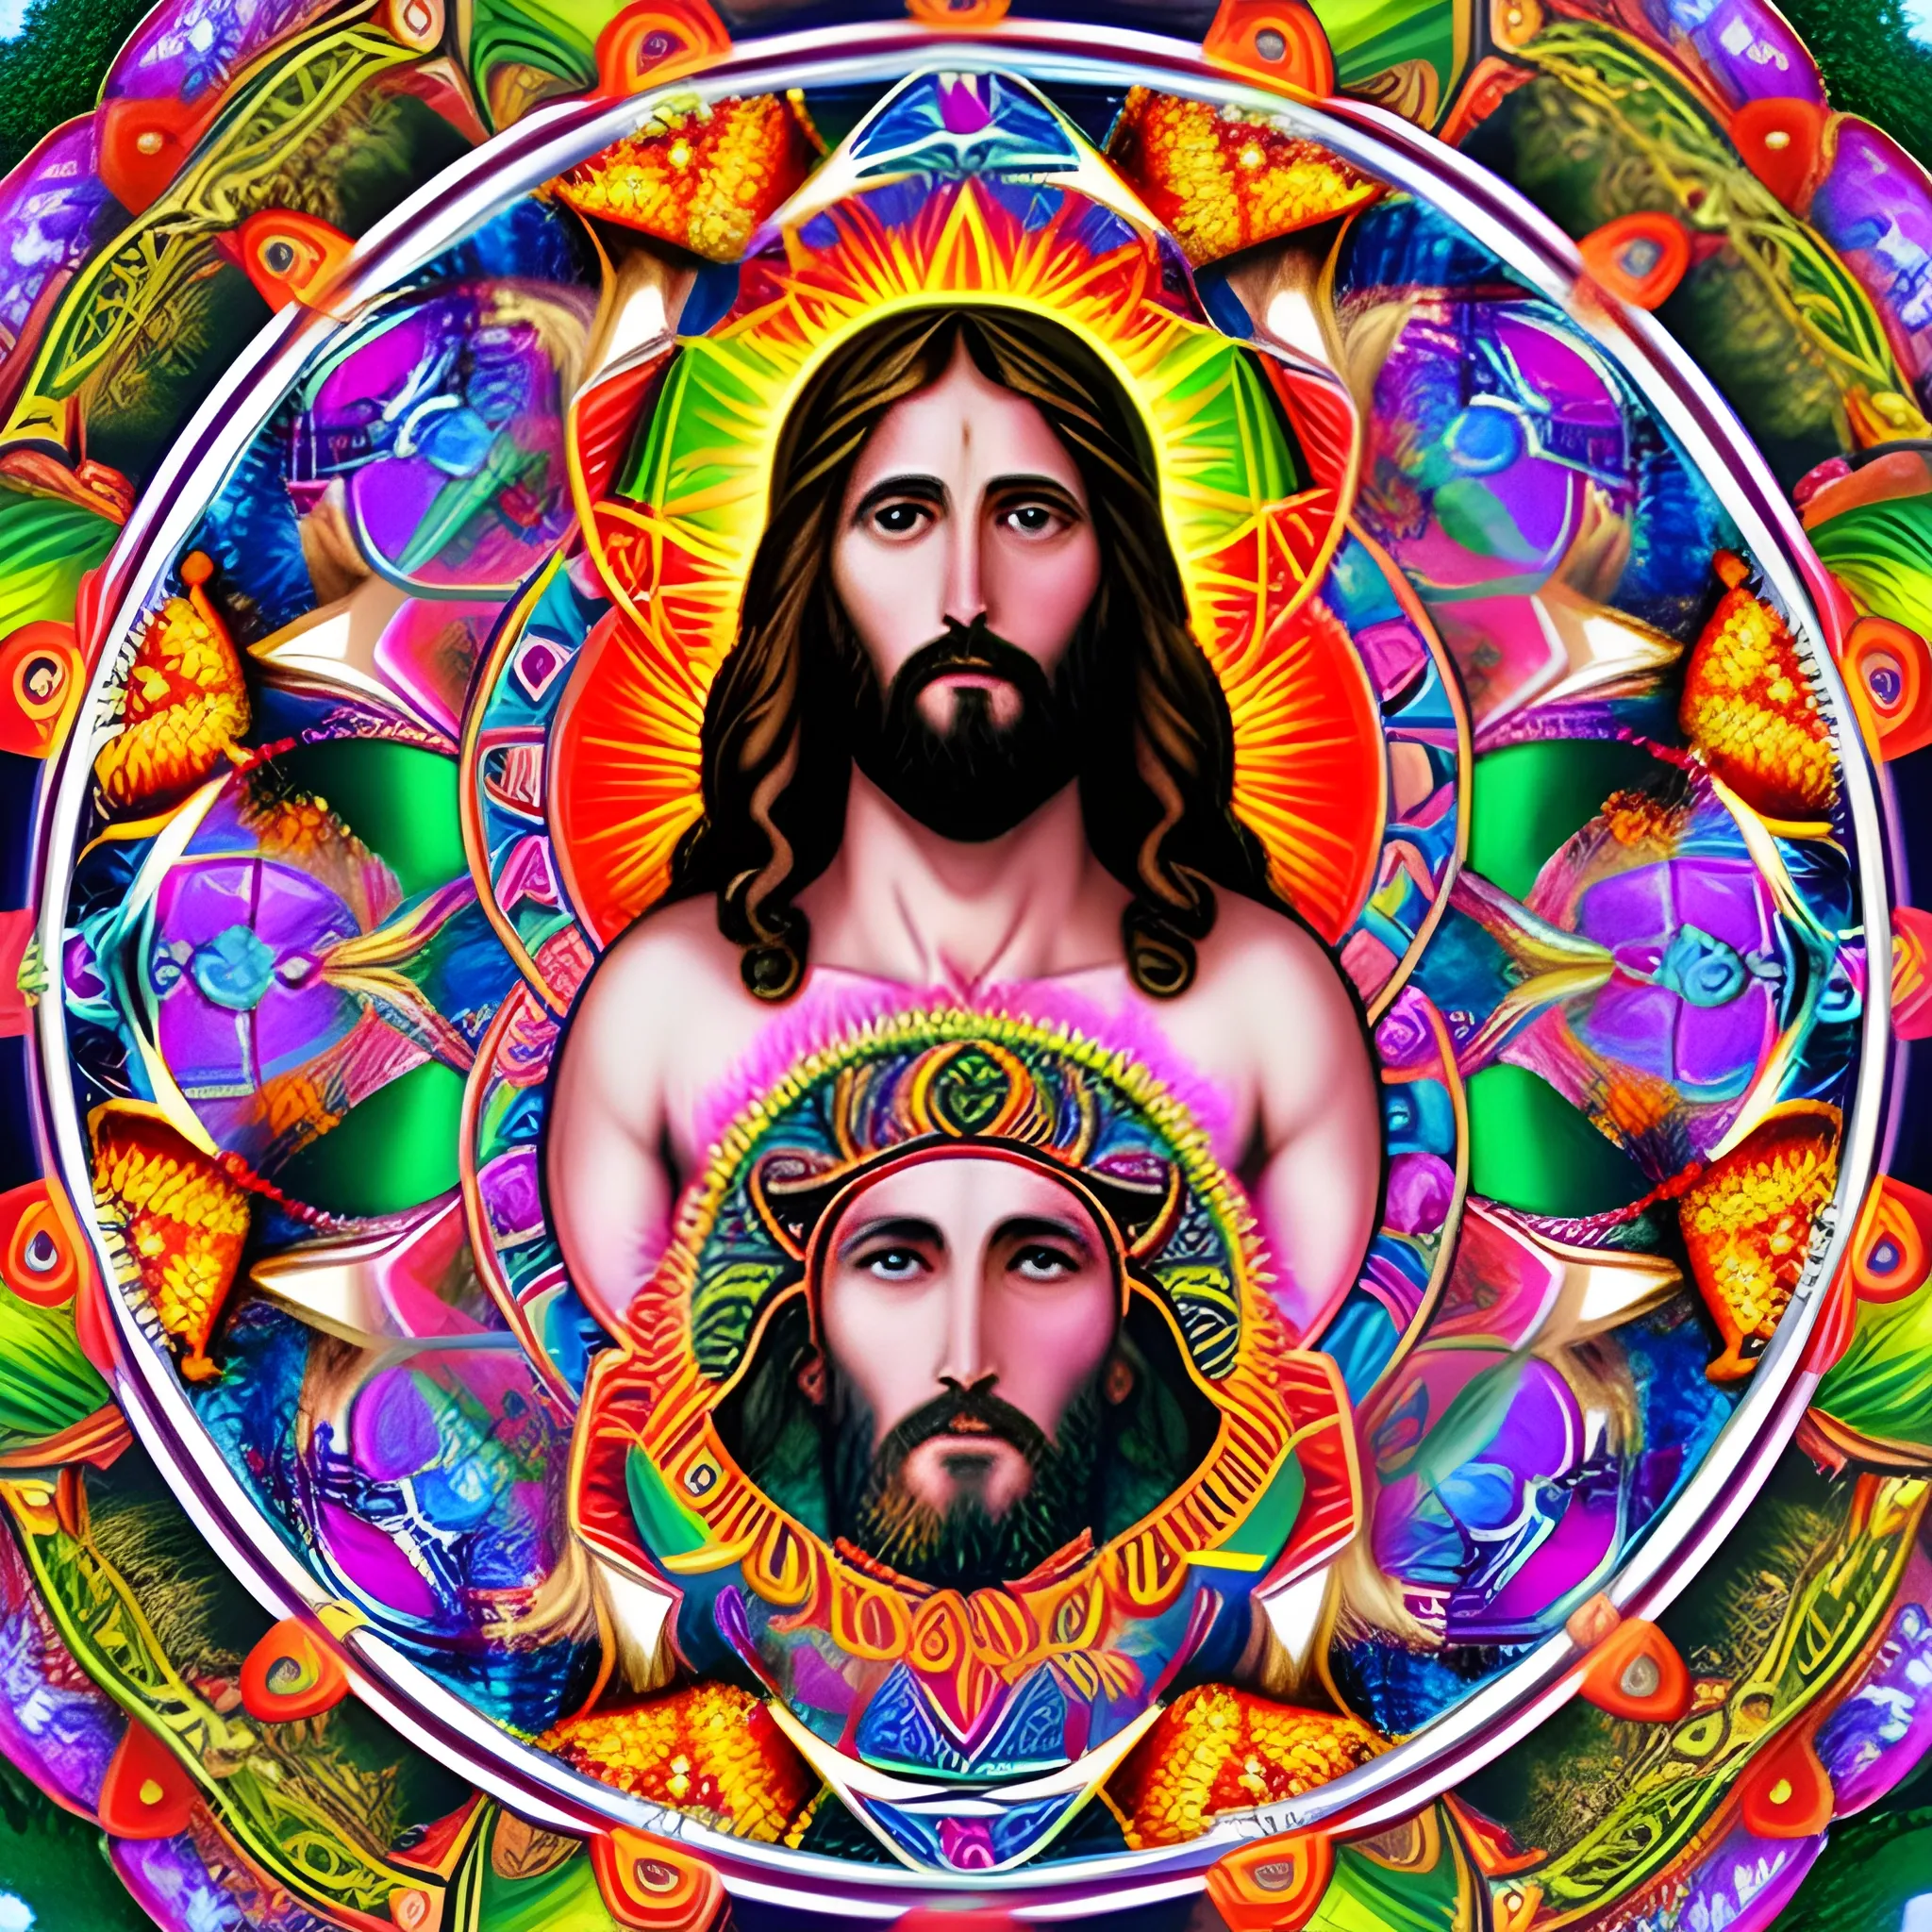 Jesus with PSYCHEDELIC, MANDALA, and SACRED GEOMETRY in the background

